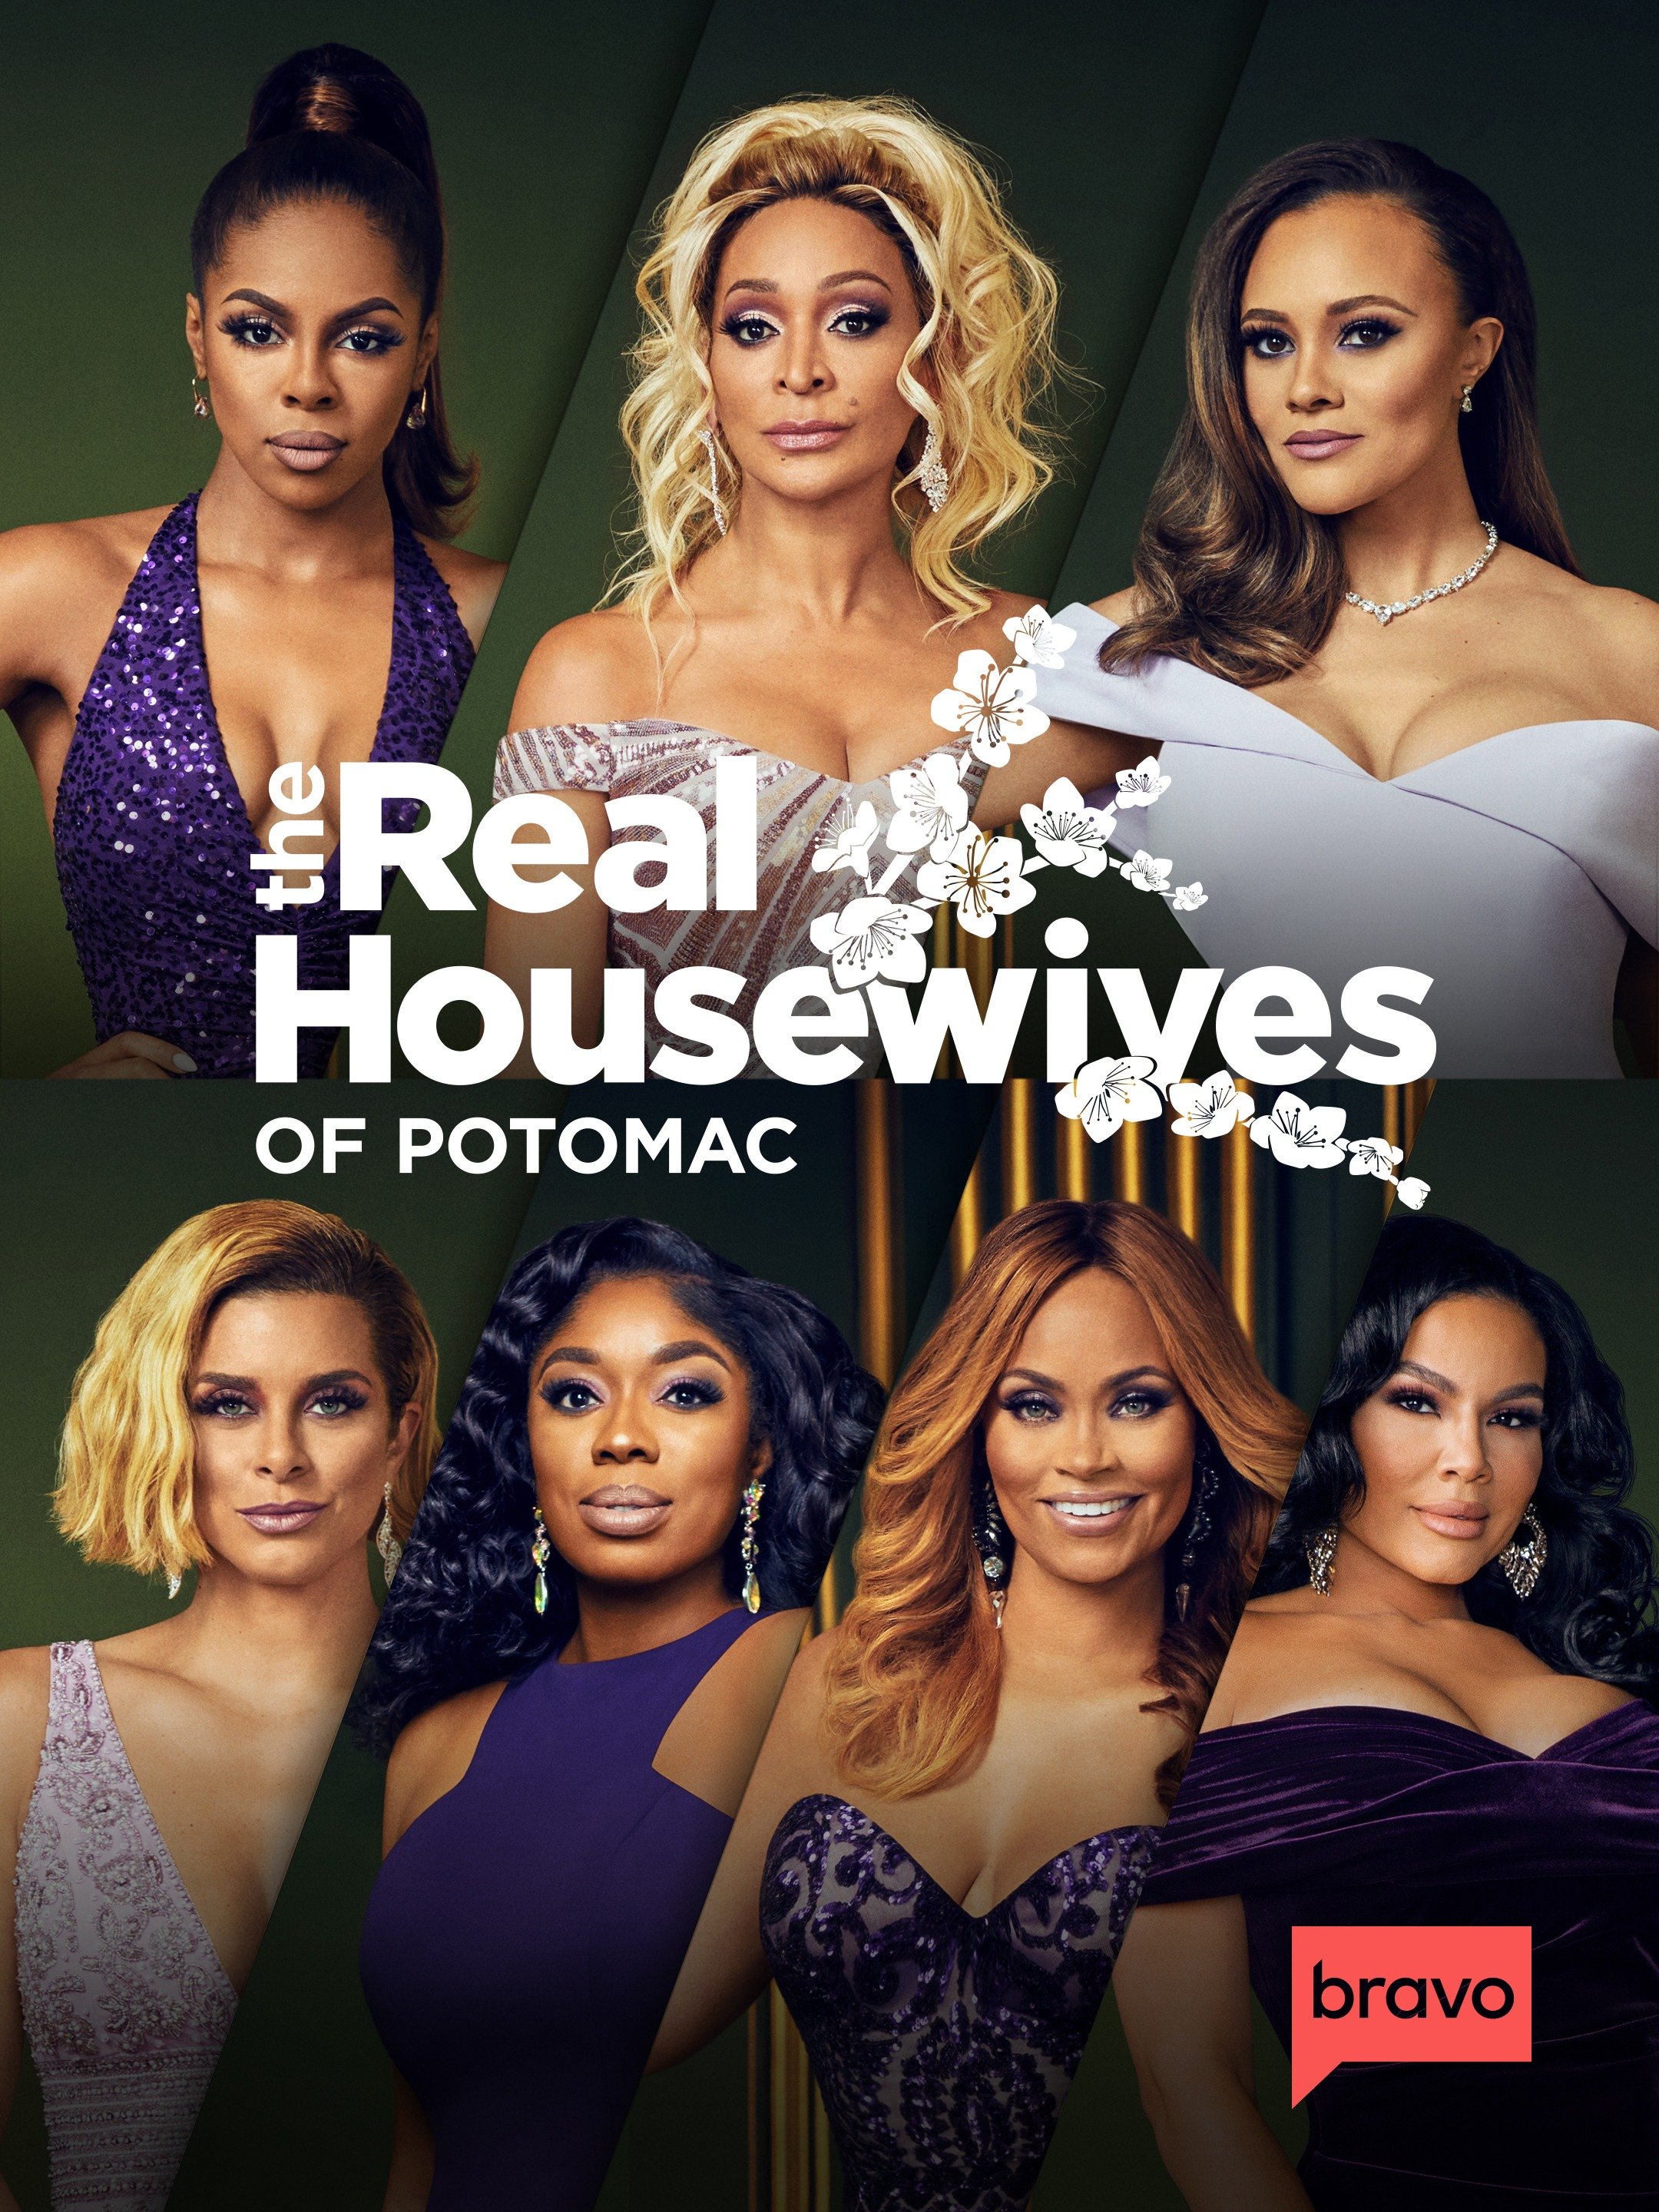 The Real Housewives of Potomac pic